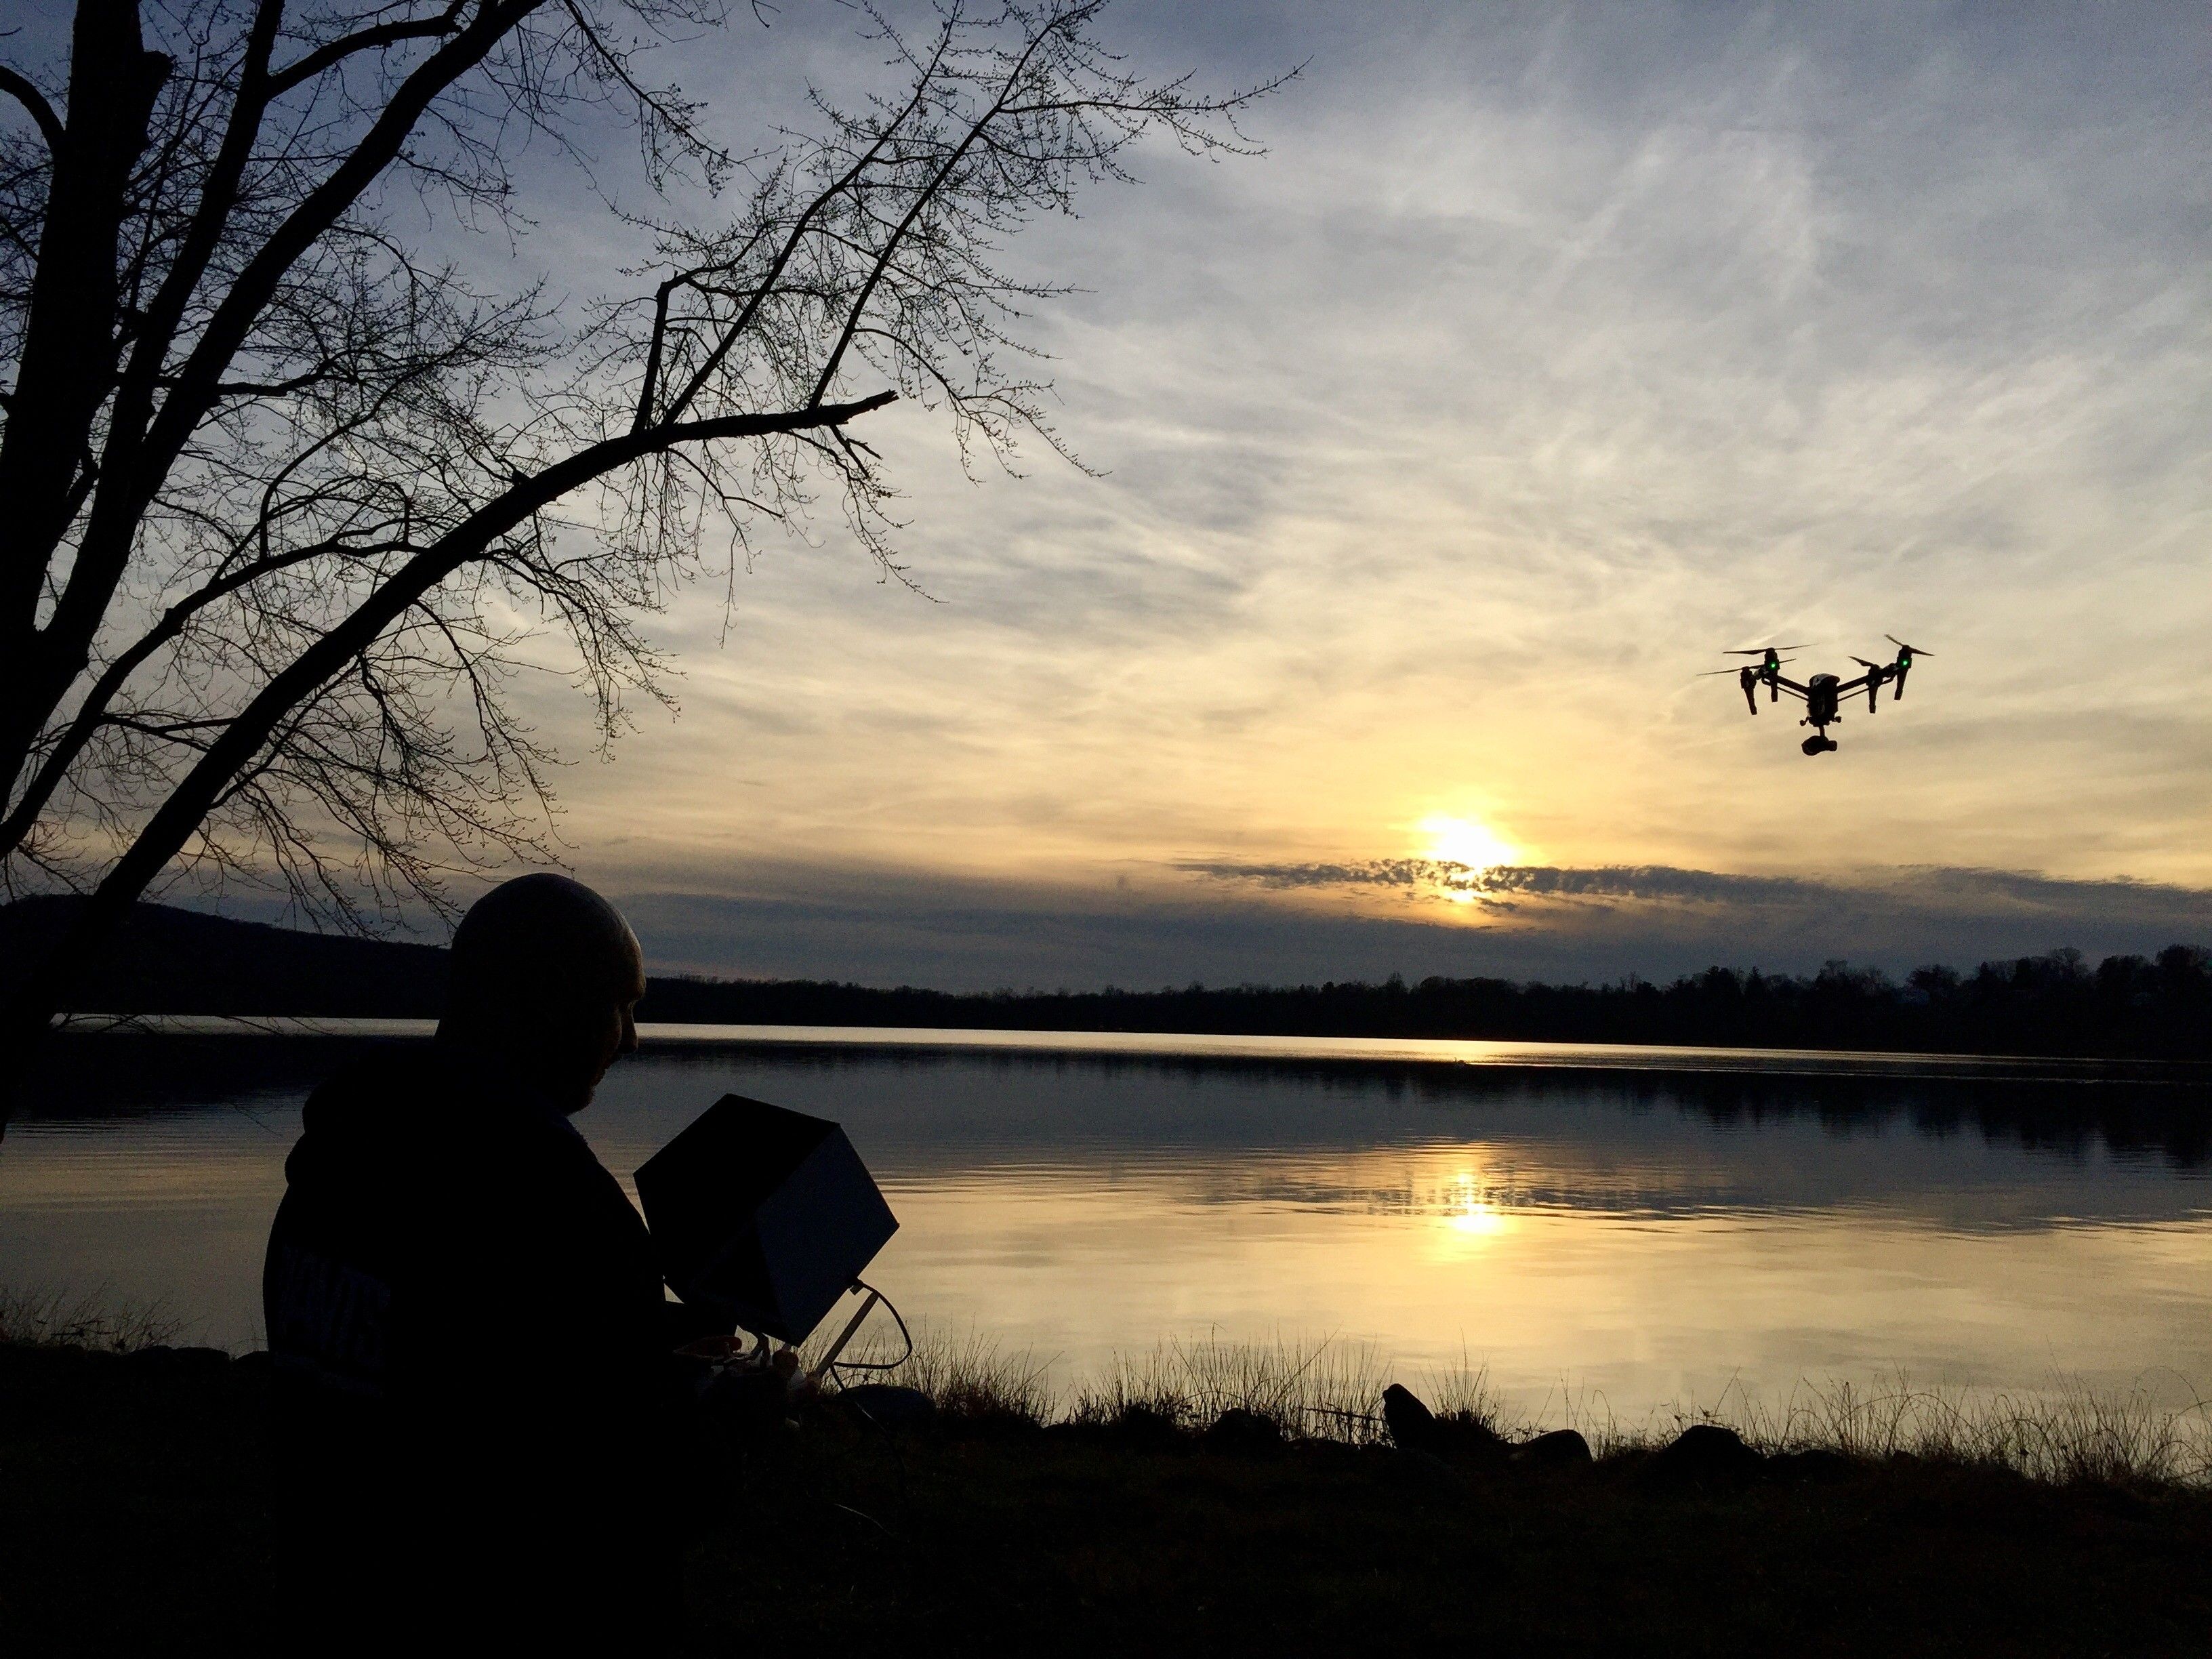 The 10 Best Drones & Aerial Accessories of 2016